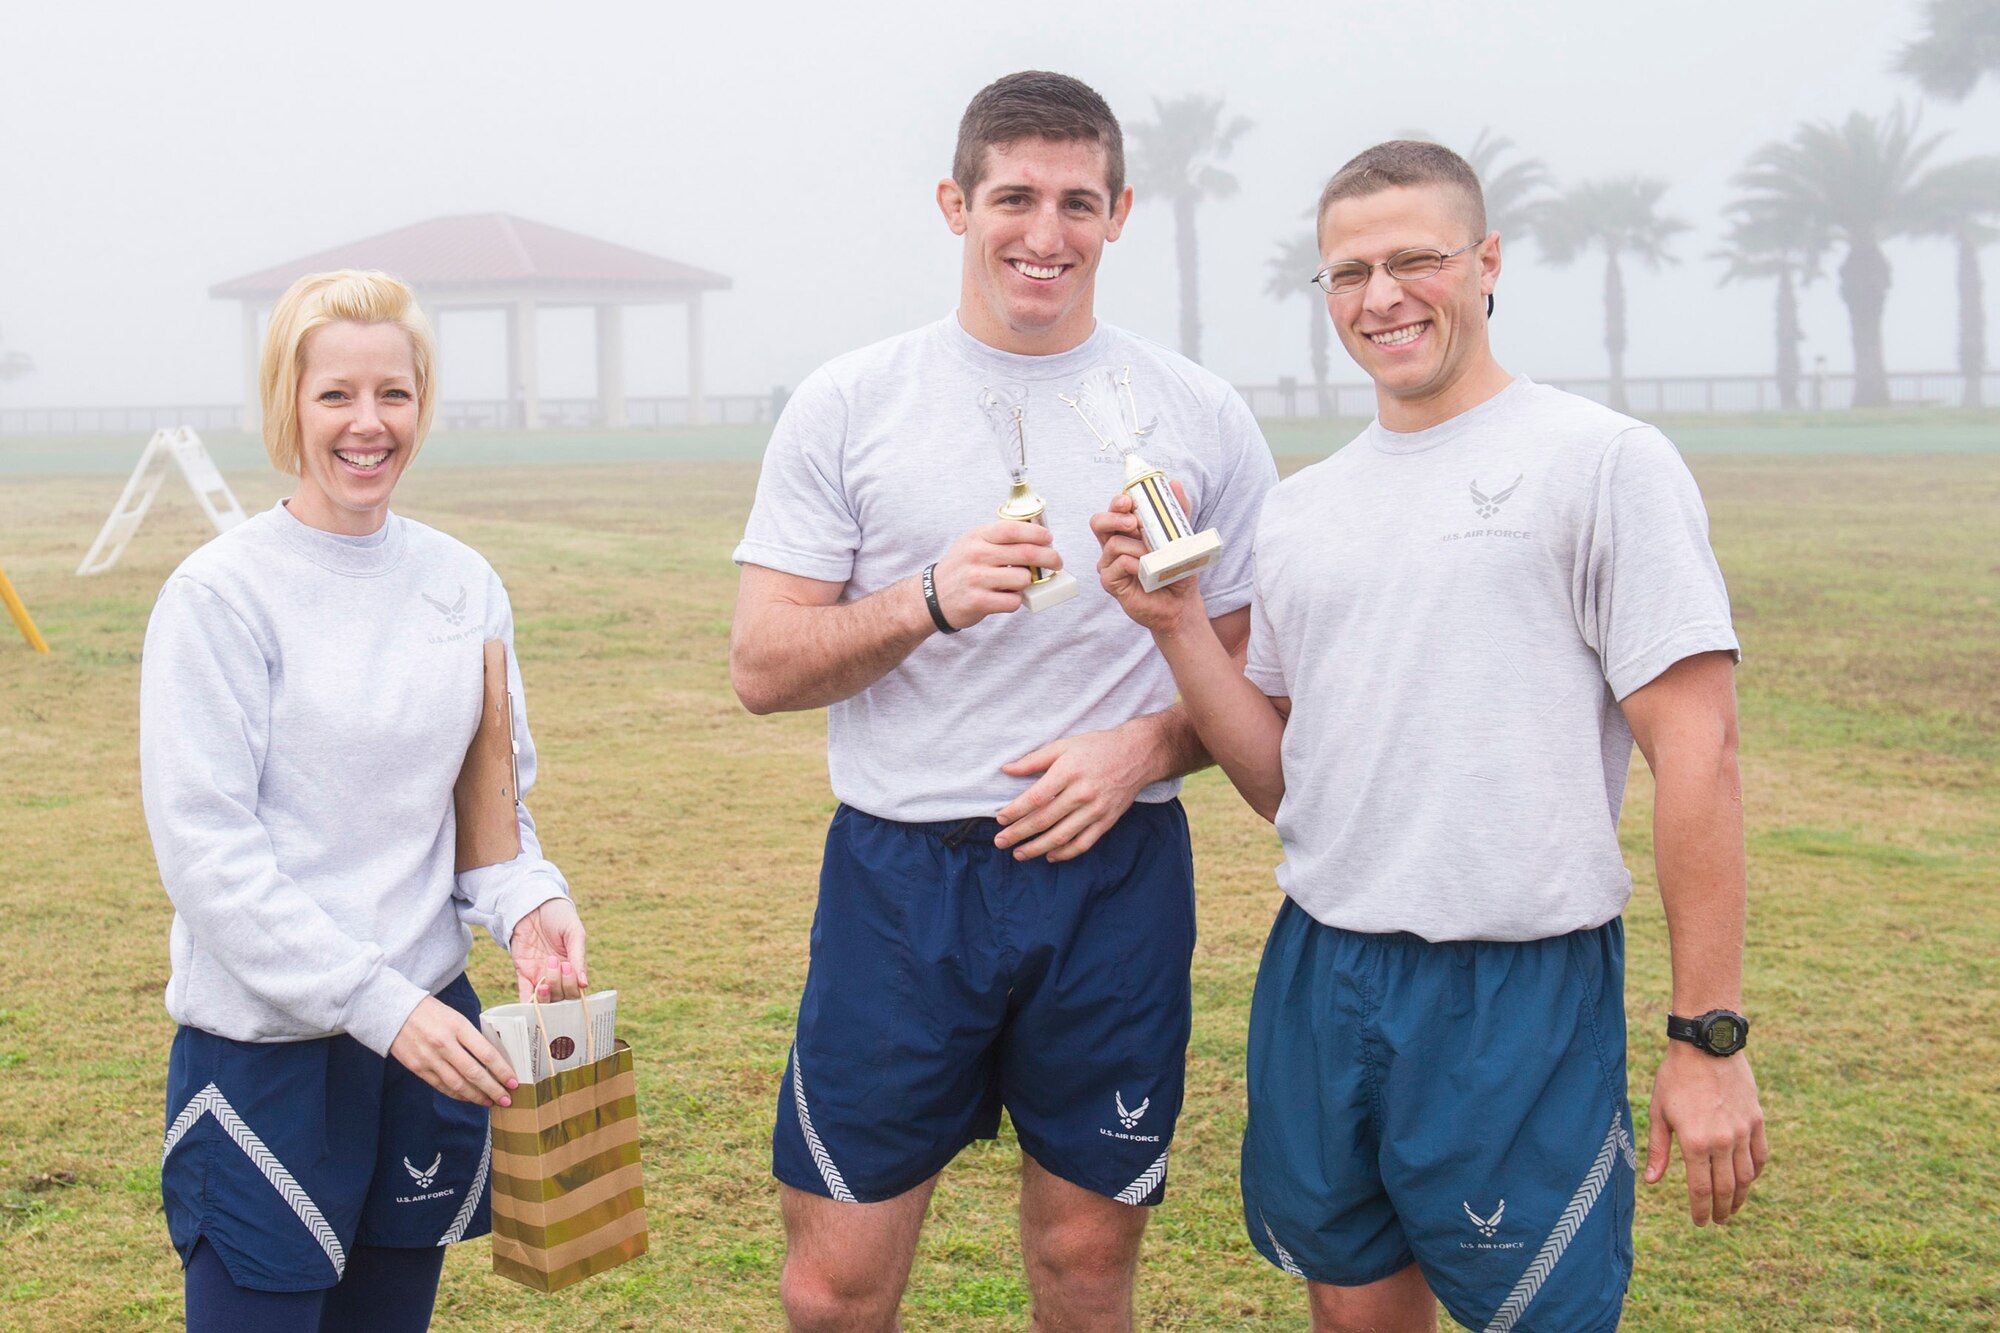 The winners of the Women’s History Month Obstacle Course, 2nd Lt. Charles Hohnbaum and 2nd Lt. Joshua Kreimier, both from the 5th Launch Support Squadron, hold up their awards as Master Sgt. Stacy Lindsey, 45th Space Wing first sergeant and organizer for the event, pose with them March 2, 2015, at Warfit Field on Patrick Air Force Base. (U.S. Air Force photo/Matthew Jurgens)